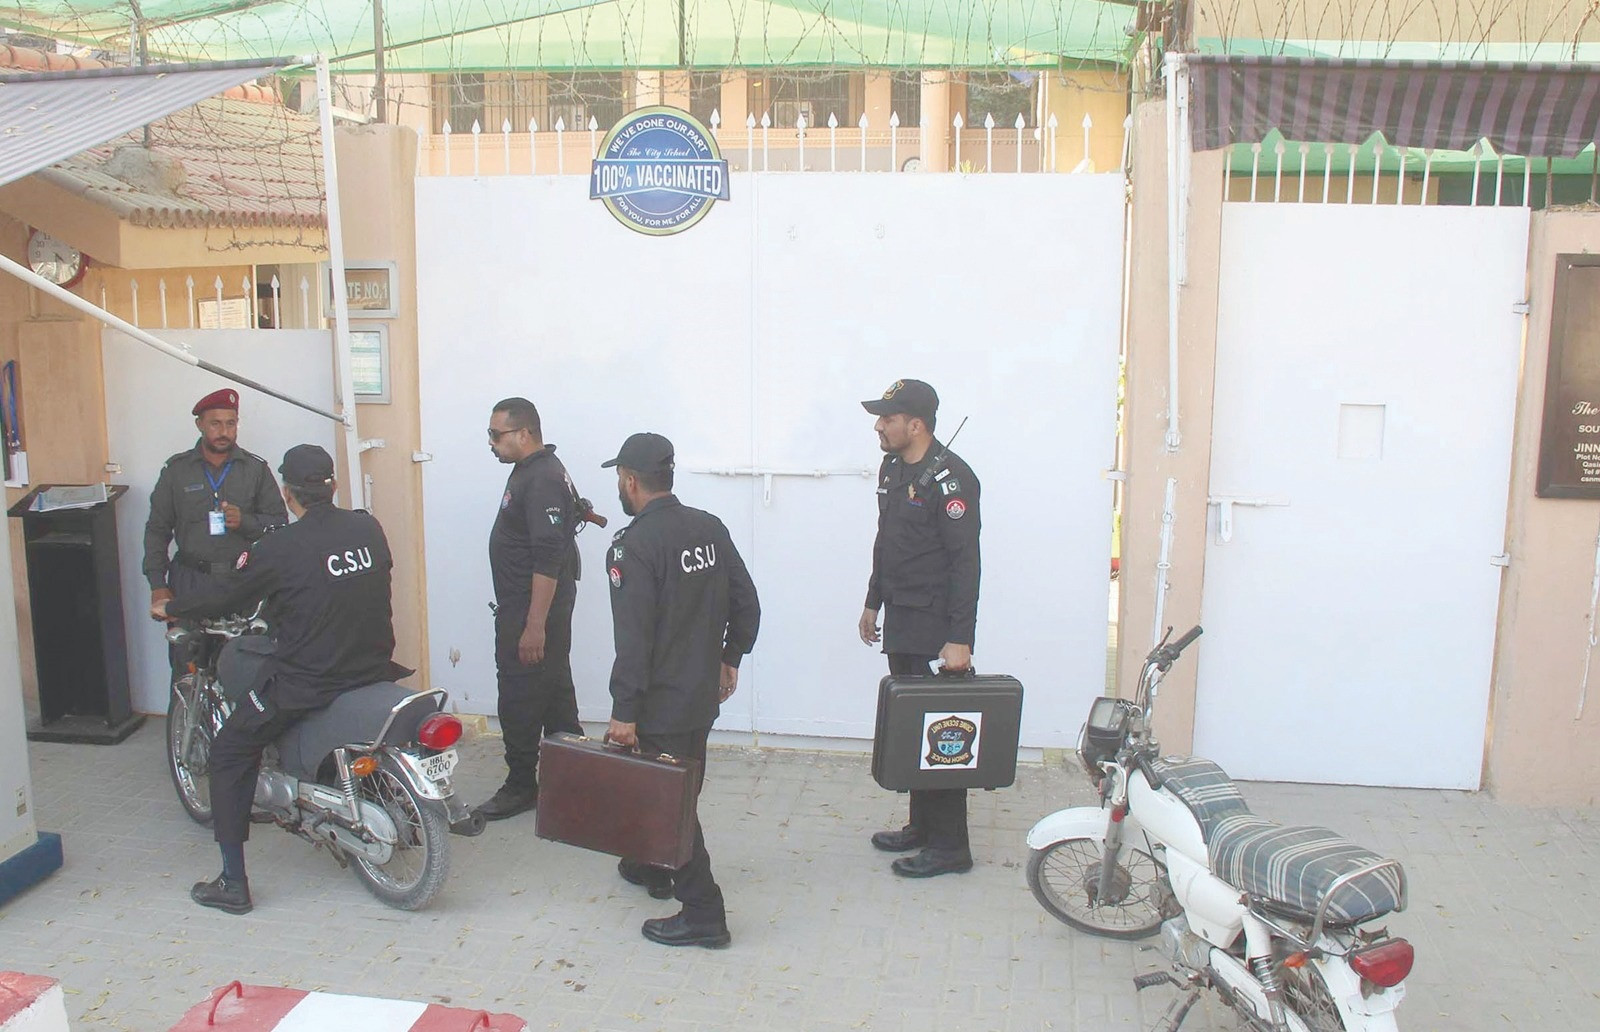 police and crime scene unit officials enter in school for further investigation after a student fall from the third floor balcony of a private school in qasimabad photo express